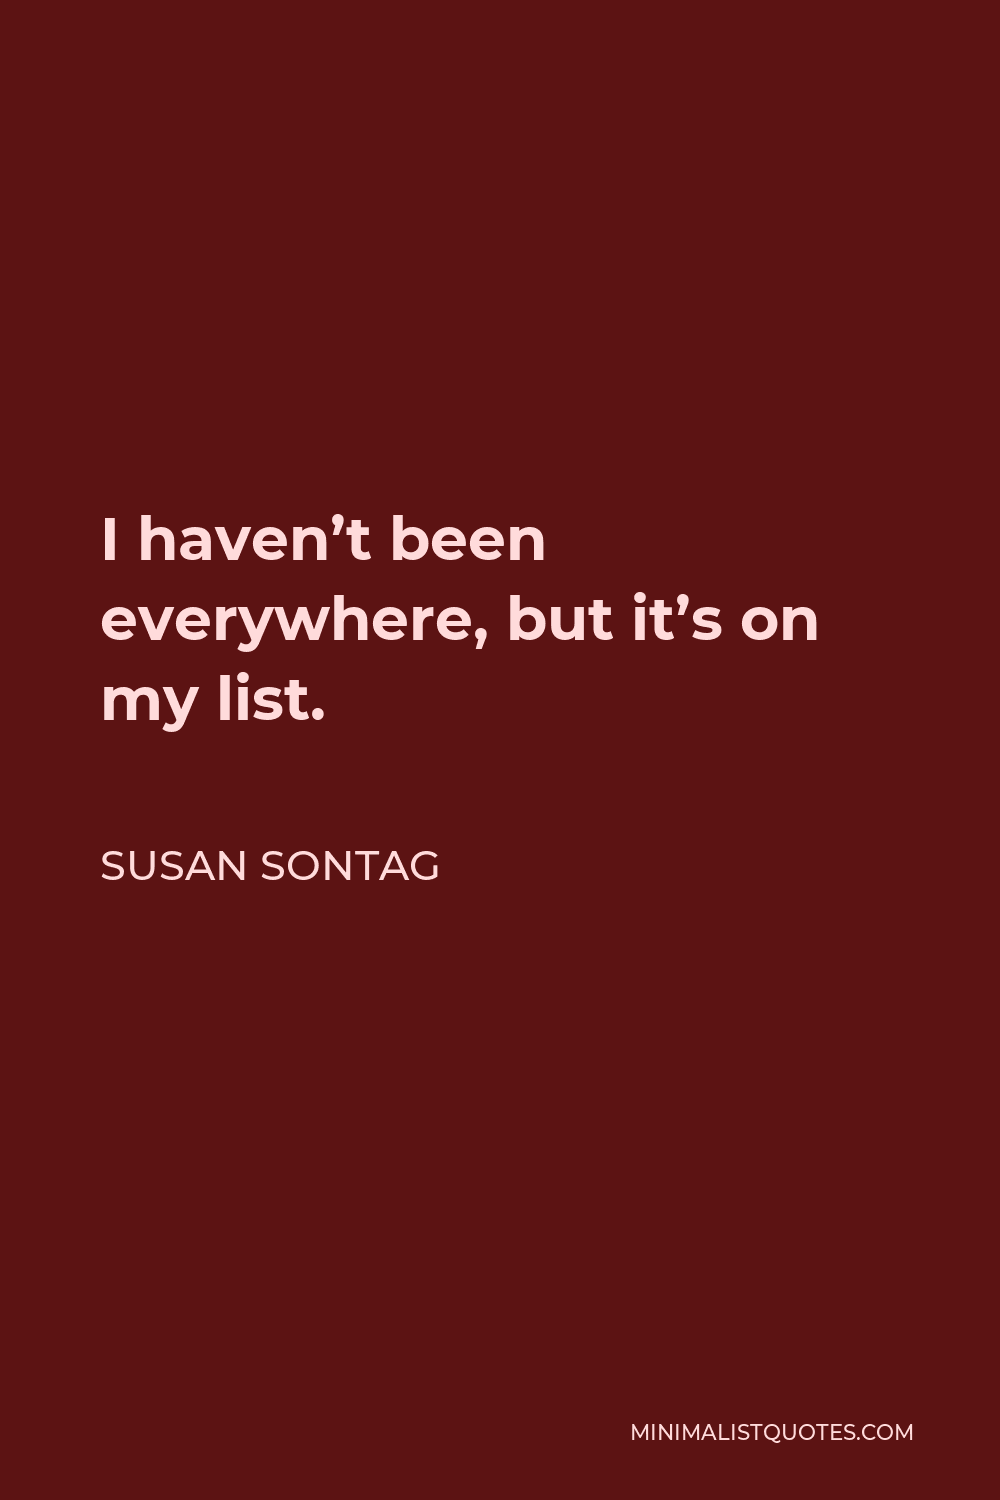 Susan Sontag Quote - I haven’t been everywhere, but it’s on my list.